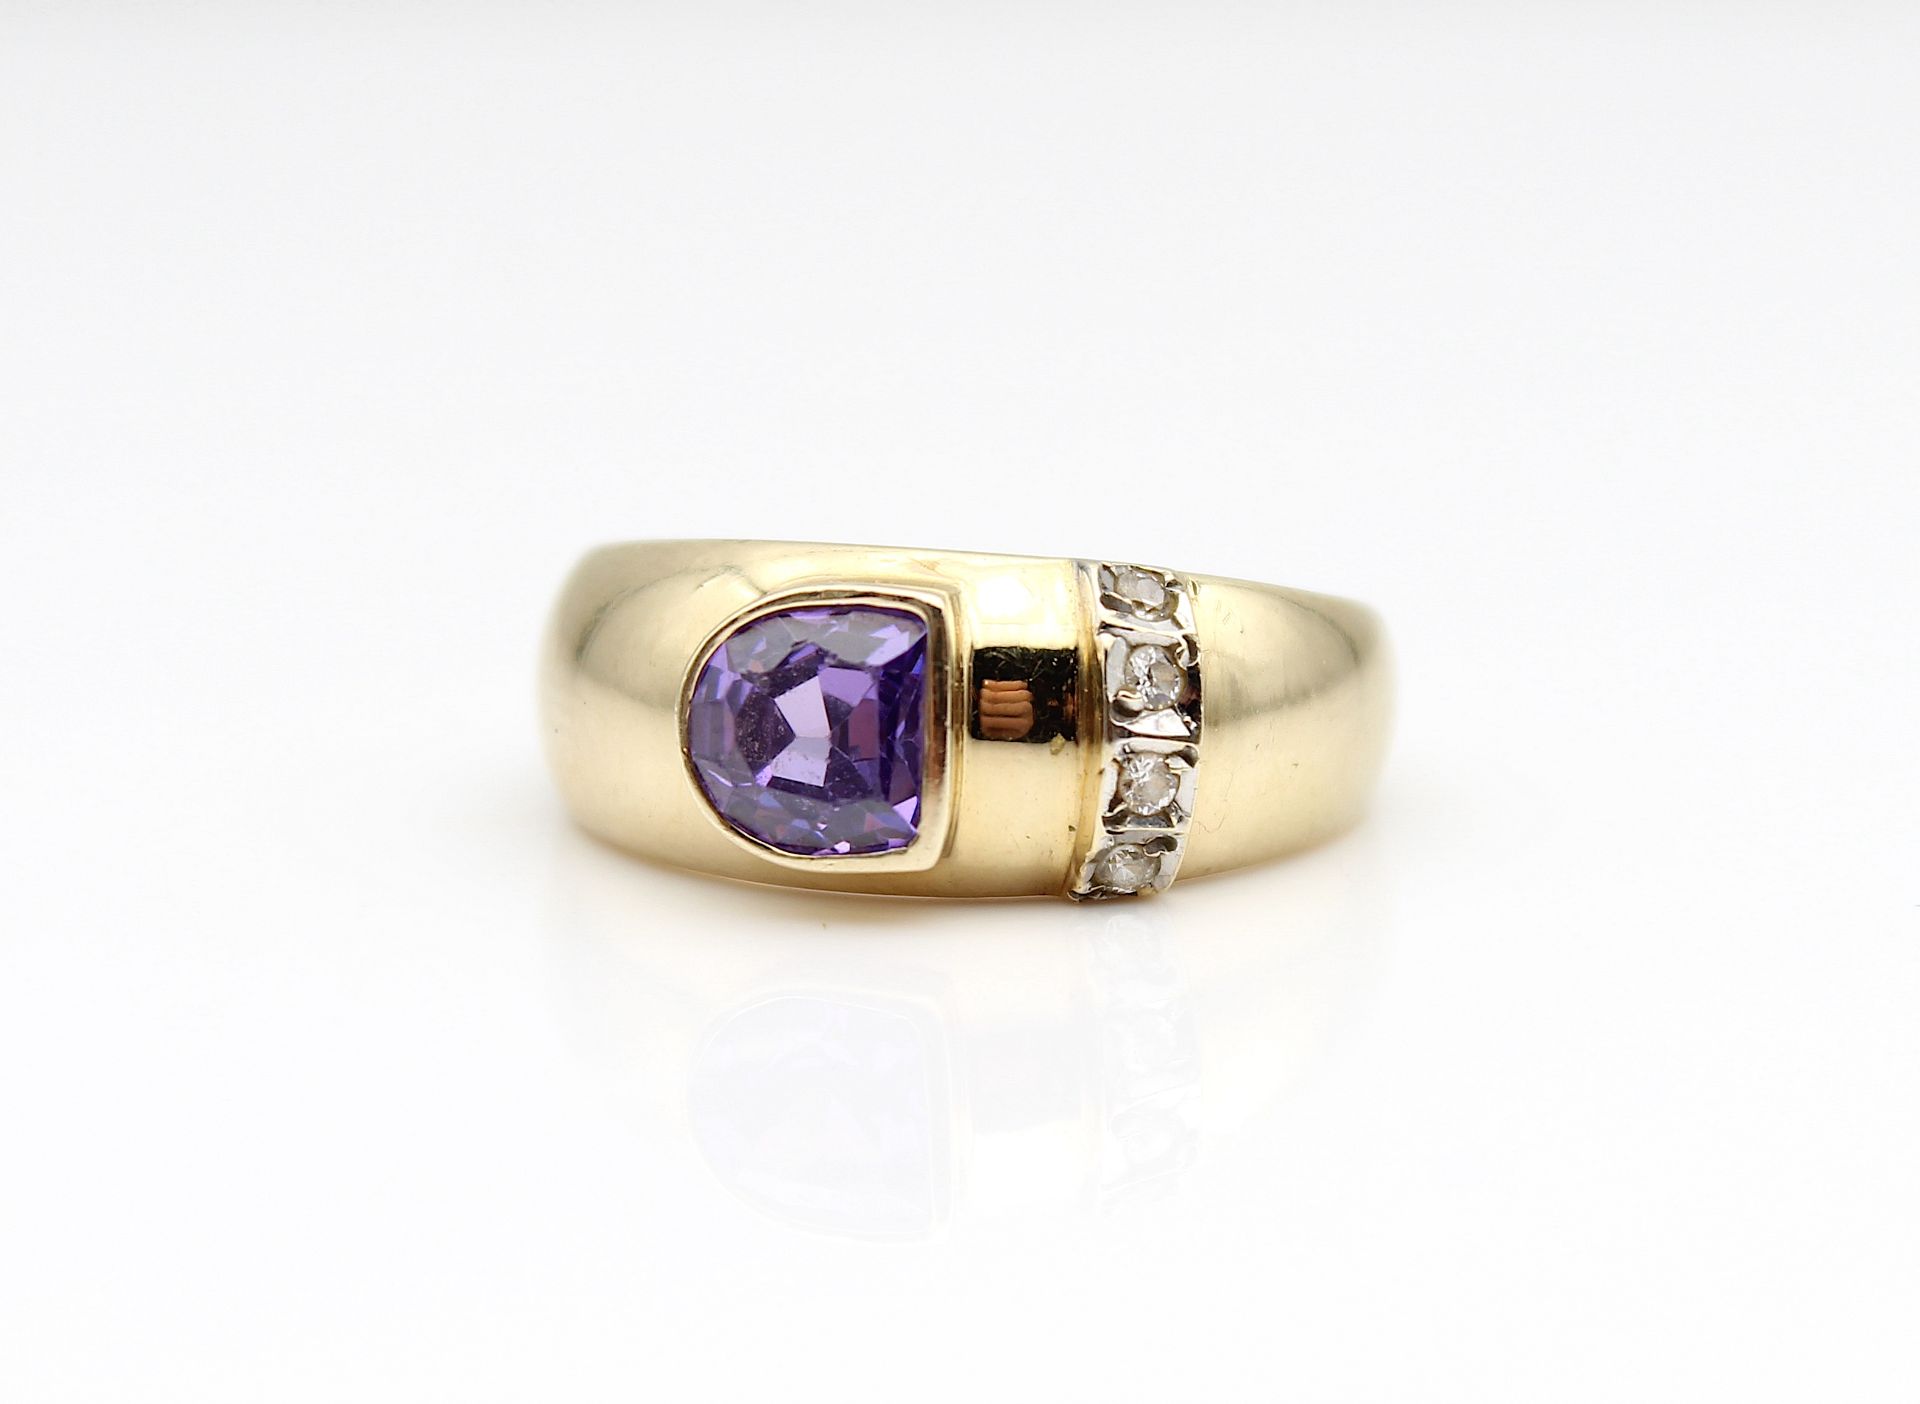 Decorative ring with colored cubic zirconia - Image 3 of 4